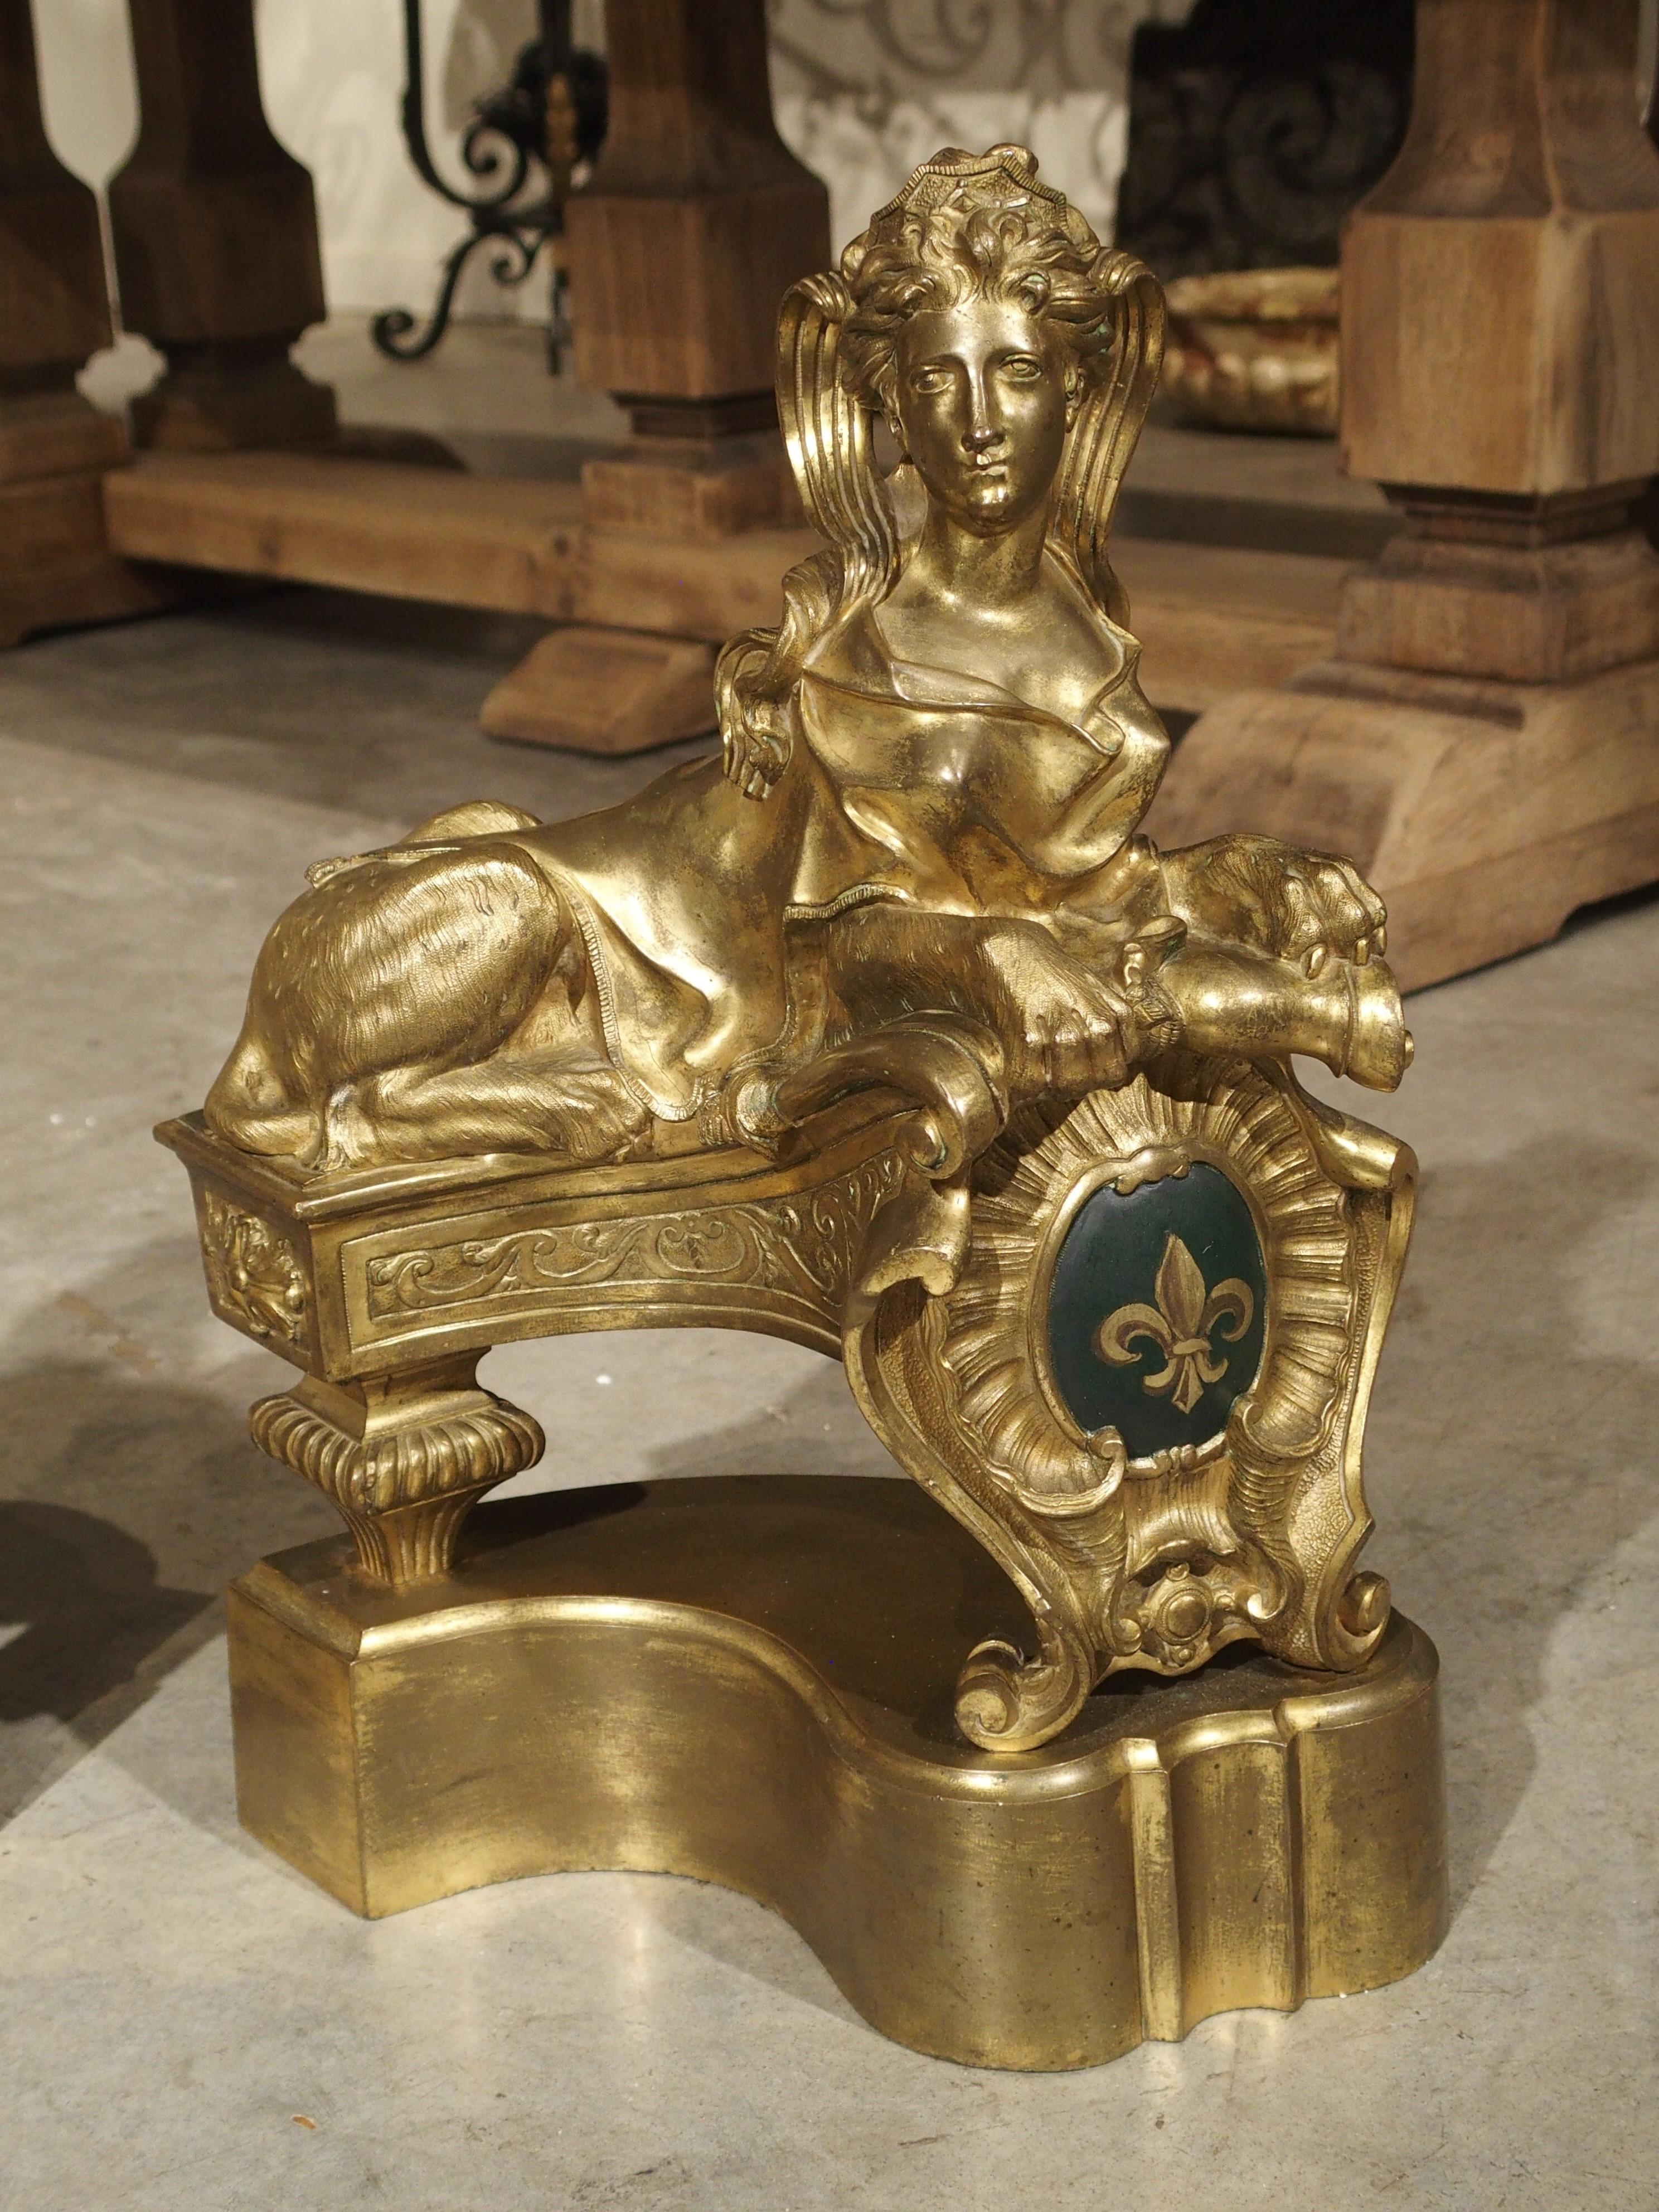 This impressive pair of chenets are made of gilt bronze and feature a rich blue rocaille cartouche with Fleur de Lys. They are based on the original sphinx chenets by Guillaume de Grof (1680-1742), a Parisian trained Flemish sculptor who would go on